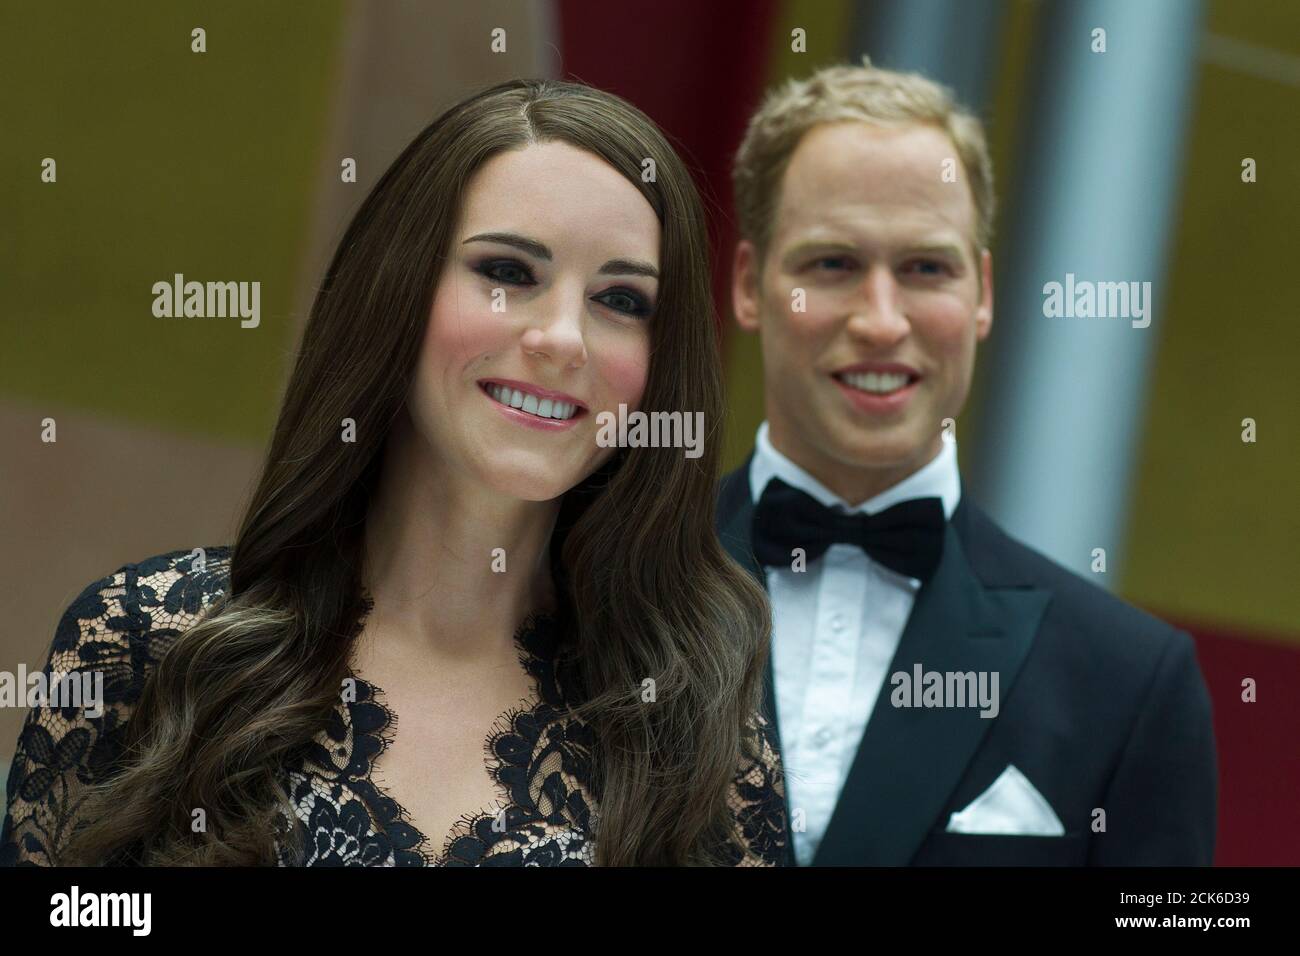 Wax figures of Kate Middleton, Duchess of Cambridge, and Prince William are on display during a media reception at the British embassy in Berlin, August 16, 2012. After the one-day stop-over at the embassy, the wax figures will be on display for 12 weeks at the Madame Tussauds in Berlin.  REUTERS/Thomas Peter (GERMANY - Tags: SOCIETY ENTERTAINMENT ROYALS) Stock Photo